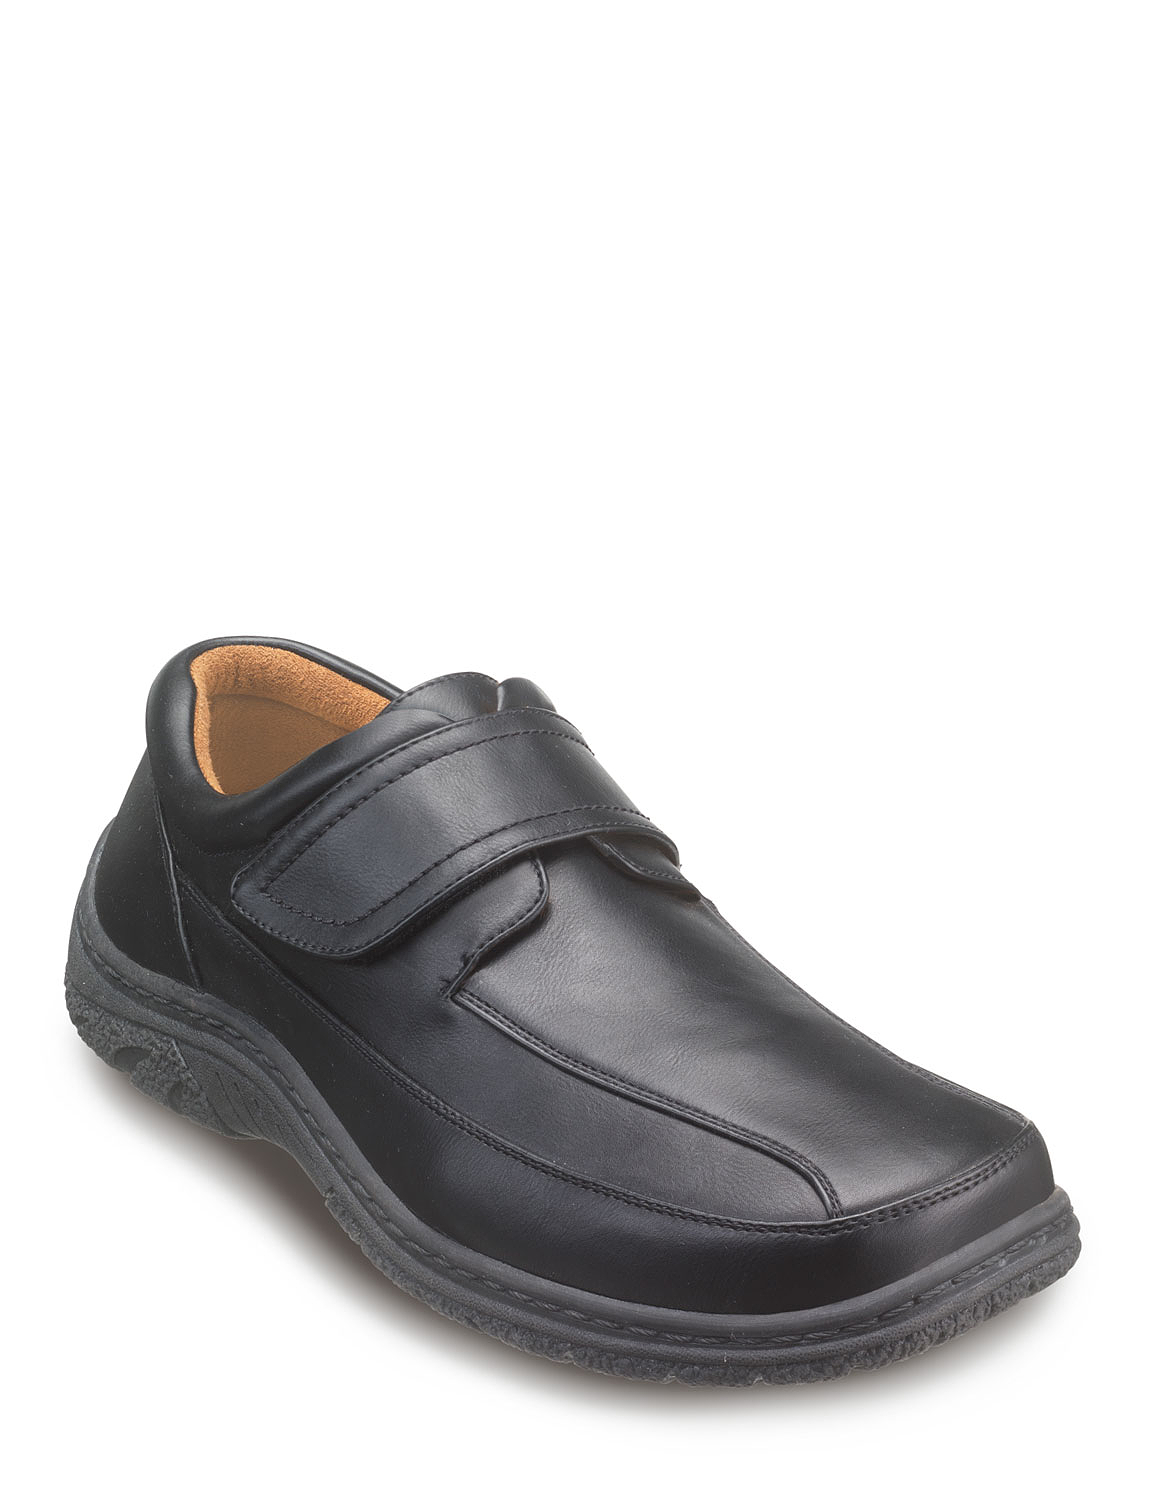 Dr Keller Wide Fit Touch Fastening Shoe | Chums